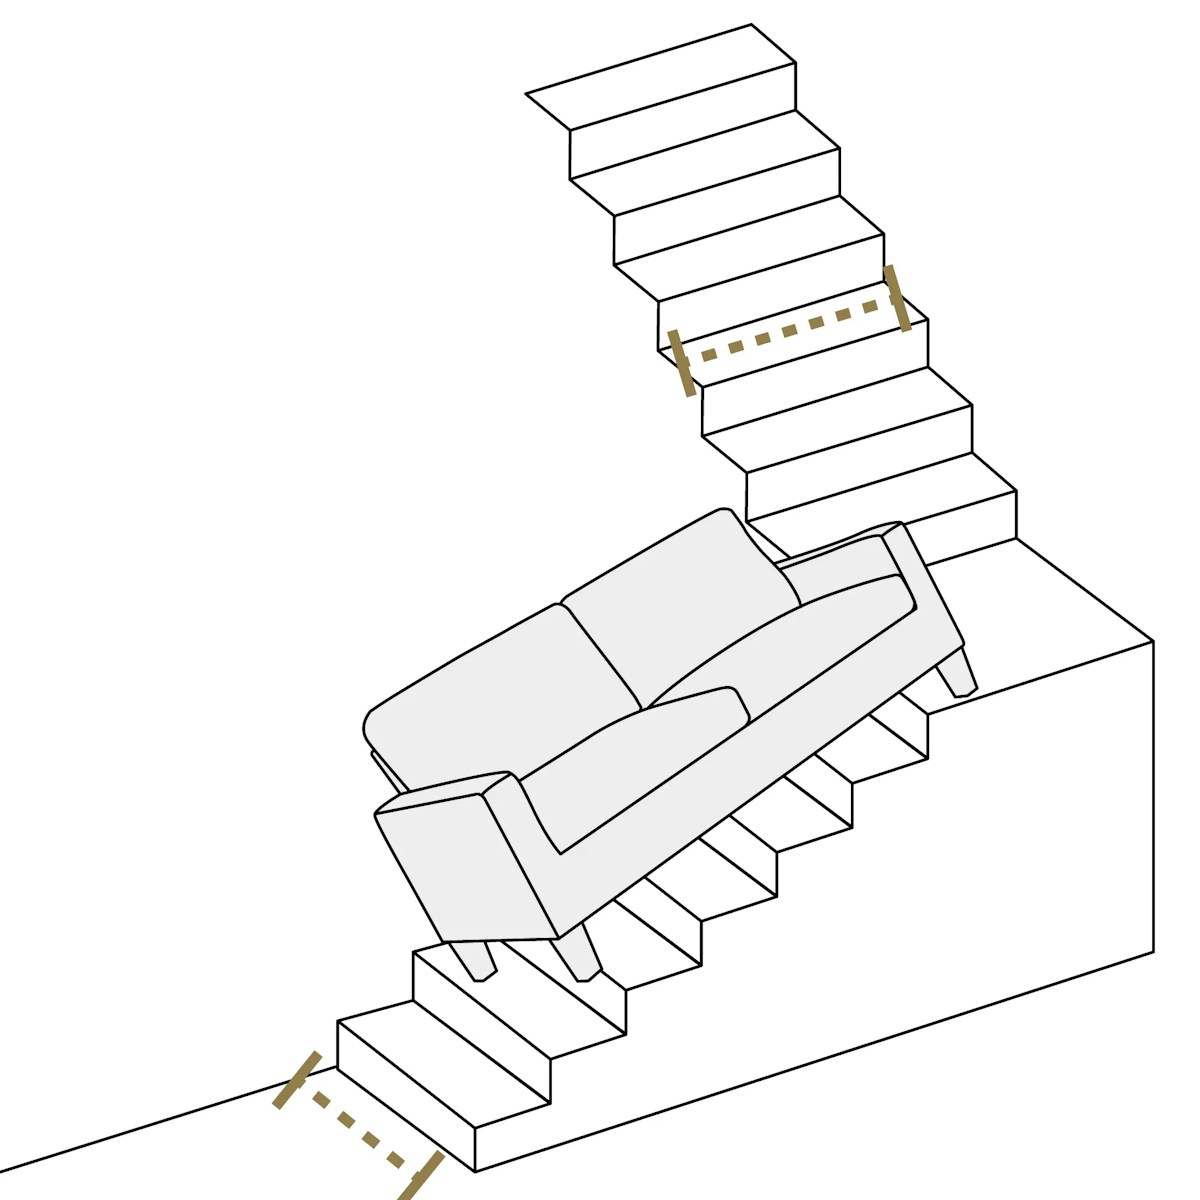 An illustration demonstrating how to scale stairs with a sofa